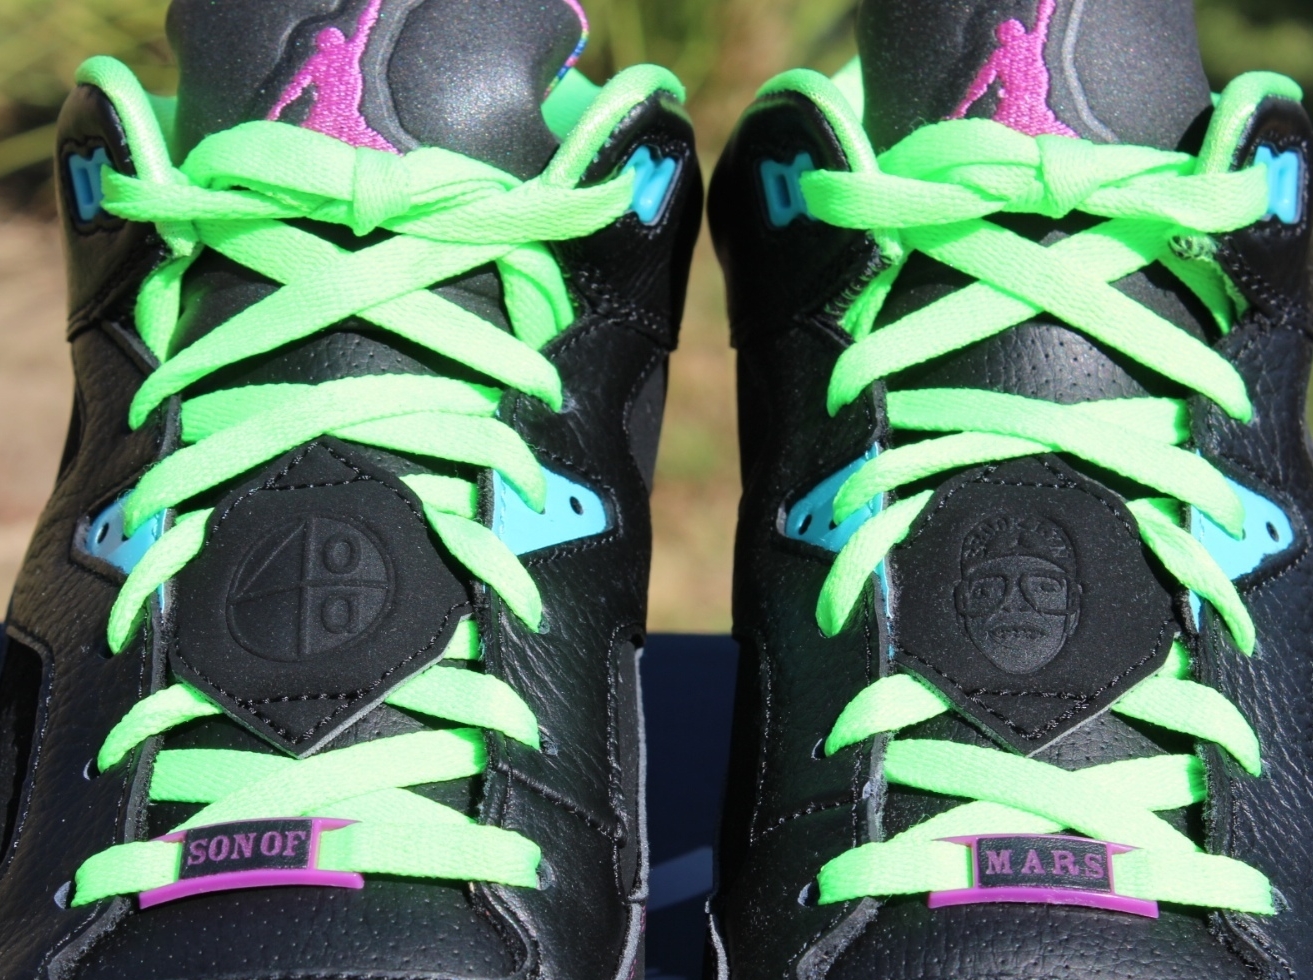 Jordan Son of Mars Low "Bel-Air" - Available Early on eBay